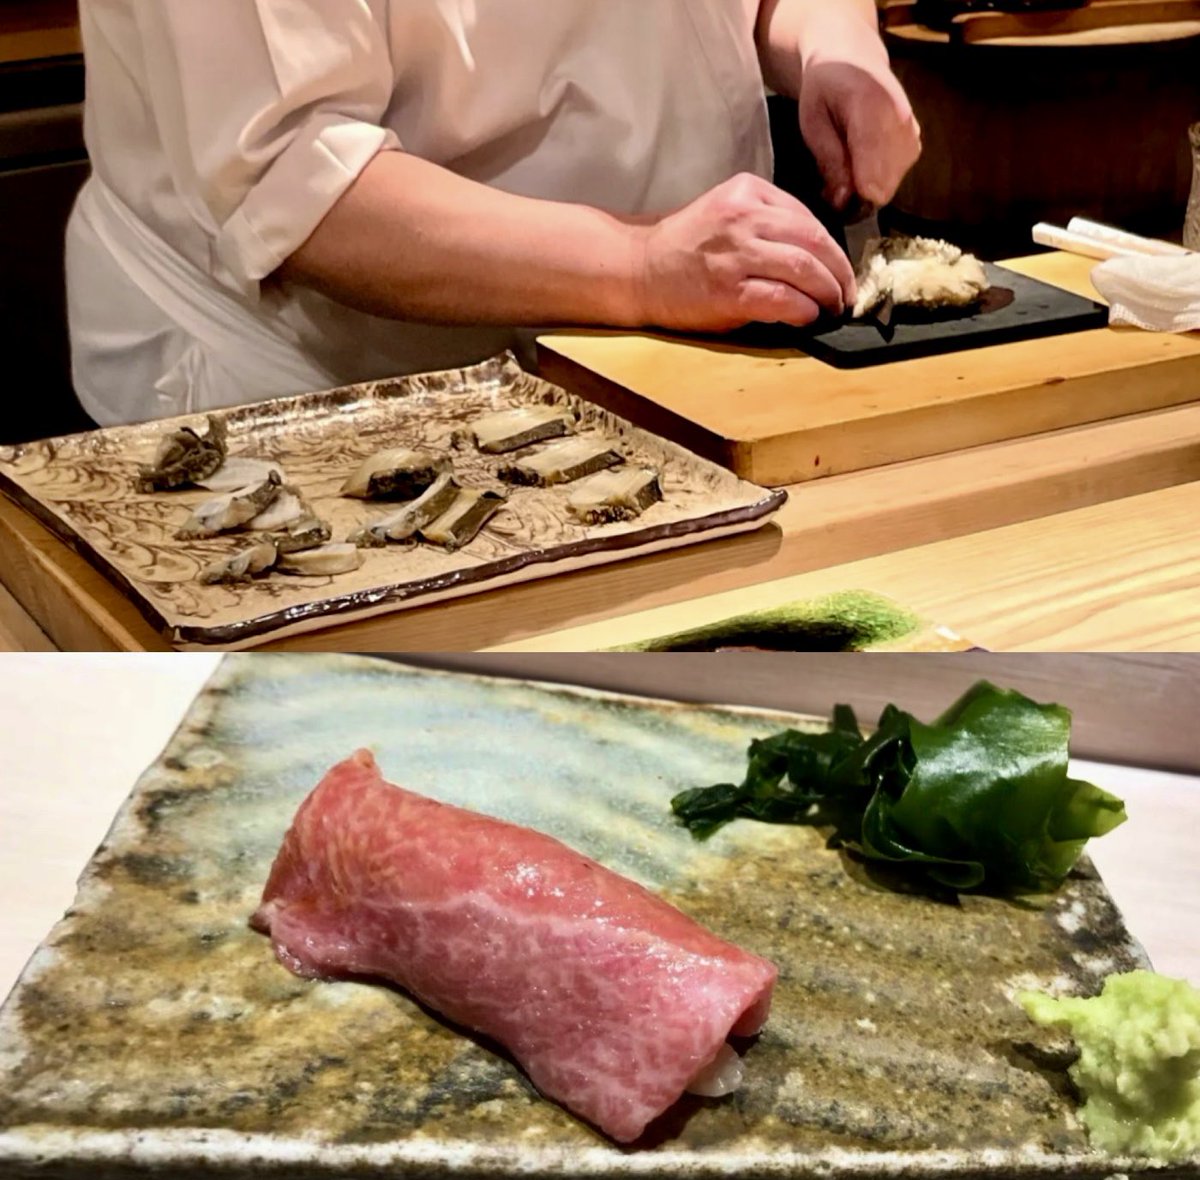 Fat chef makes good food. In Asian culture, the bigger belly, the more obese, the better cuisine. Omakase at UMI 海味. What’s the difference between Omakase & Kaisek #omakase #kaiseki #omakasesushi #michelinstar #michelin #michelinguide #chef #obese #cheflife #chefstable #1MAYIS